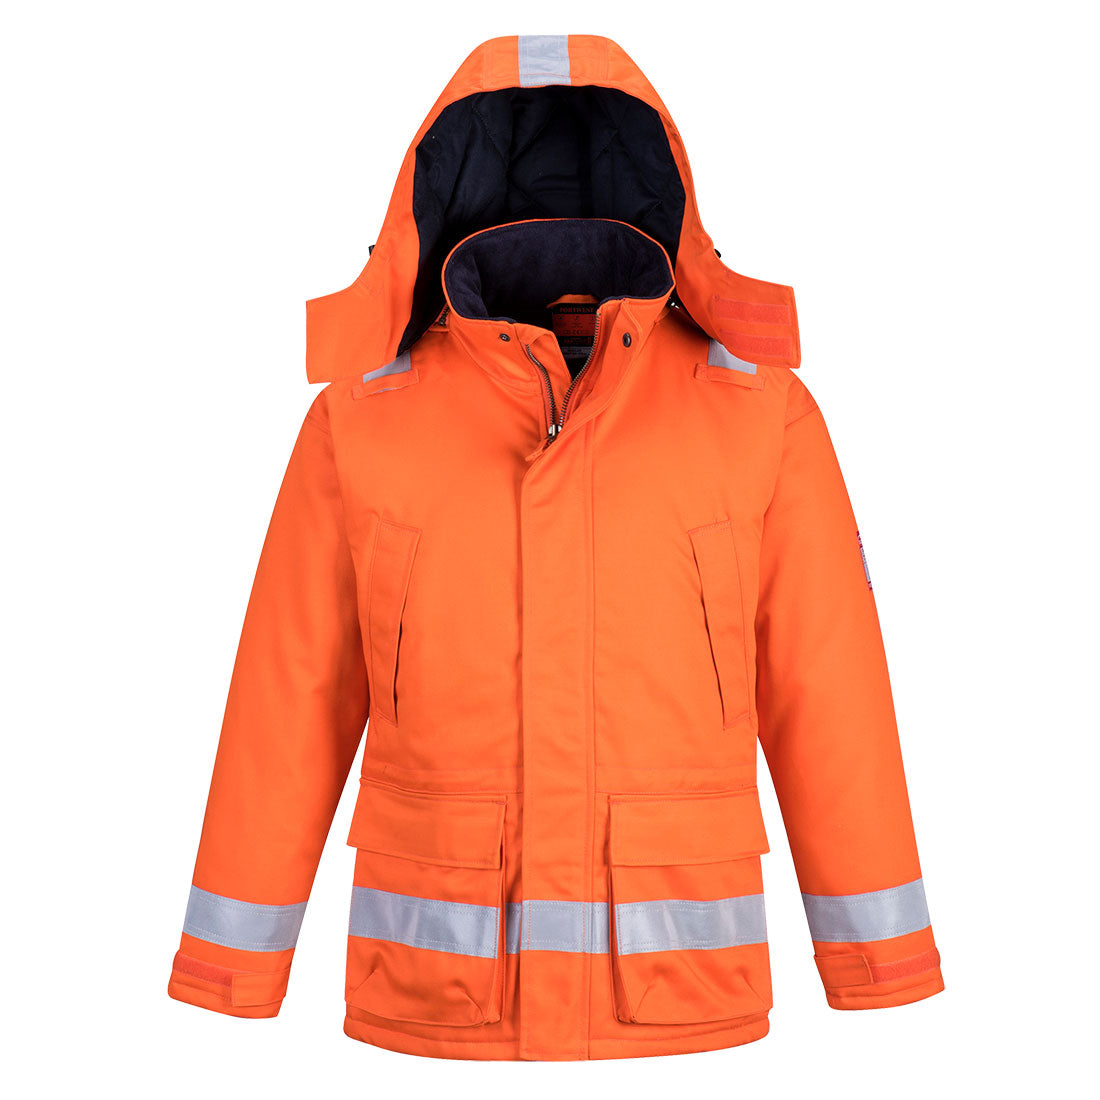 Araflame Insulated Winter Jacket